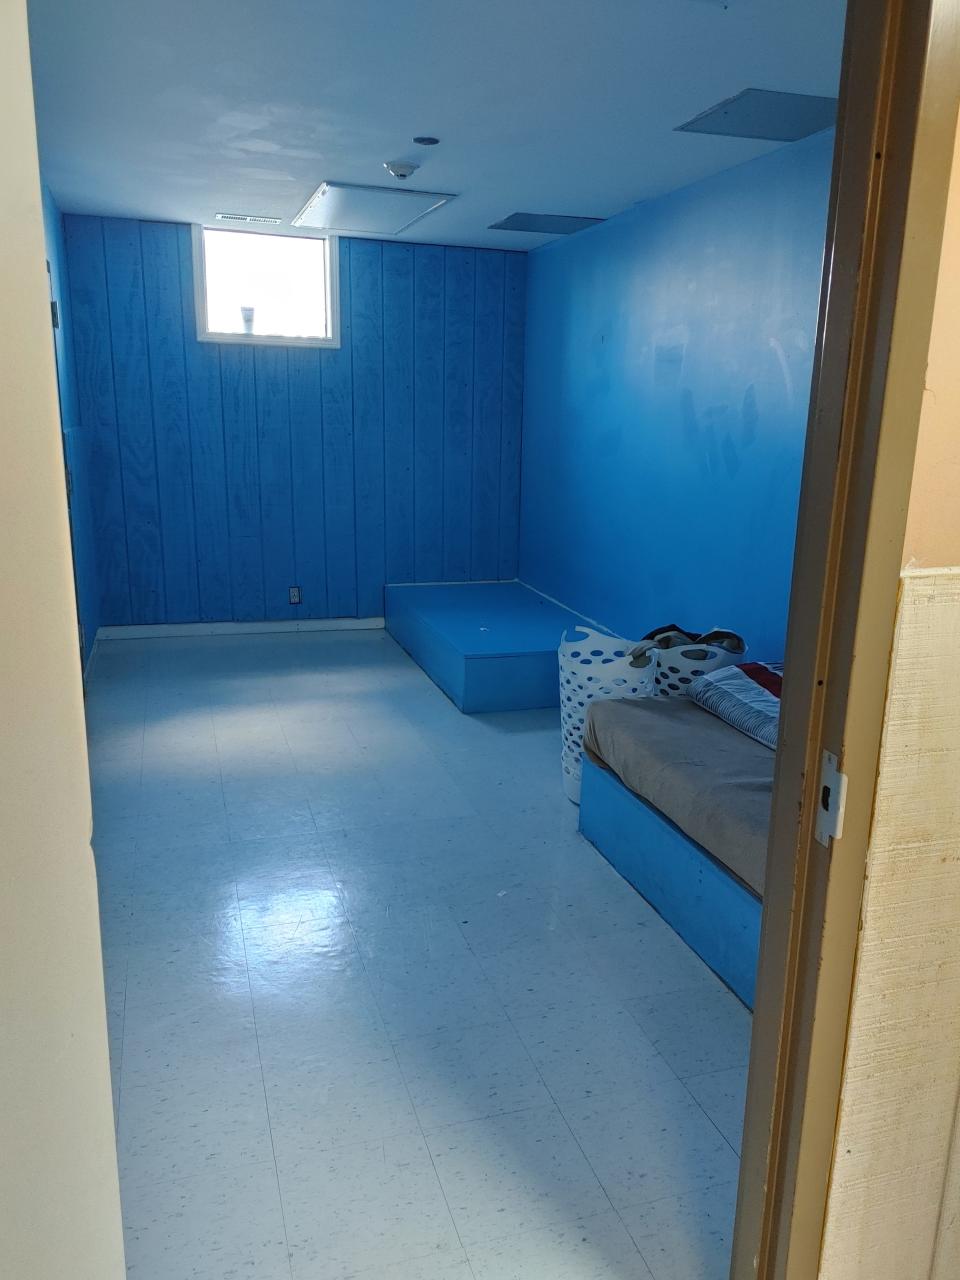 Minimal sleeping quarters for children photographed by a visitor to one of the locked holding centers in North Carolina called PRTFs (psychiatric residential treatment facilities). An investigation by USA TODAY Network in 2021 found that many Black and brown foster children are being sent to these guarded centers, where abuses sometimes happen.